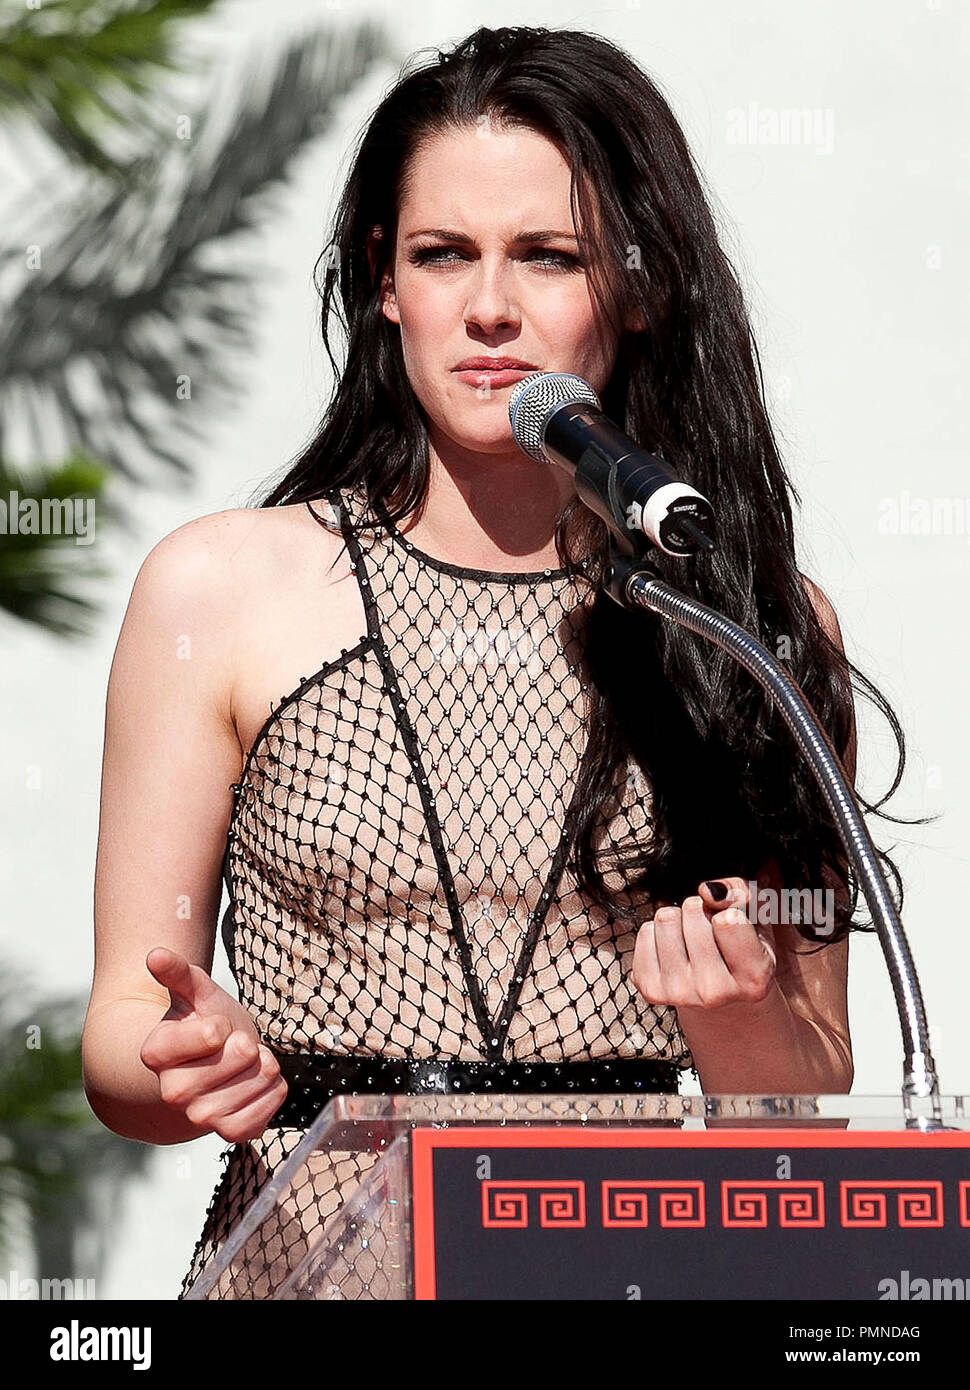 Kristen Stewart at the 'Twilight' Trio Robert Pattinson, Kristen Stewart and Taylor Lautner Hand And Footprint Ceremony held at Grauman's Mann Chinese Theatre in Hollywood, CA. The event took place on Thursday, November 3, 2011. Photo by John Salangsang/ PRPP/ PictureLux Stock Photo